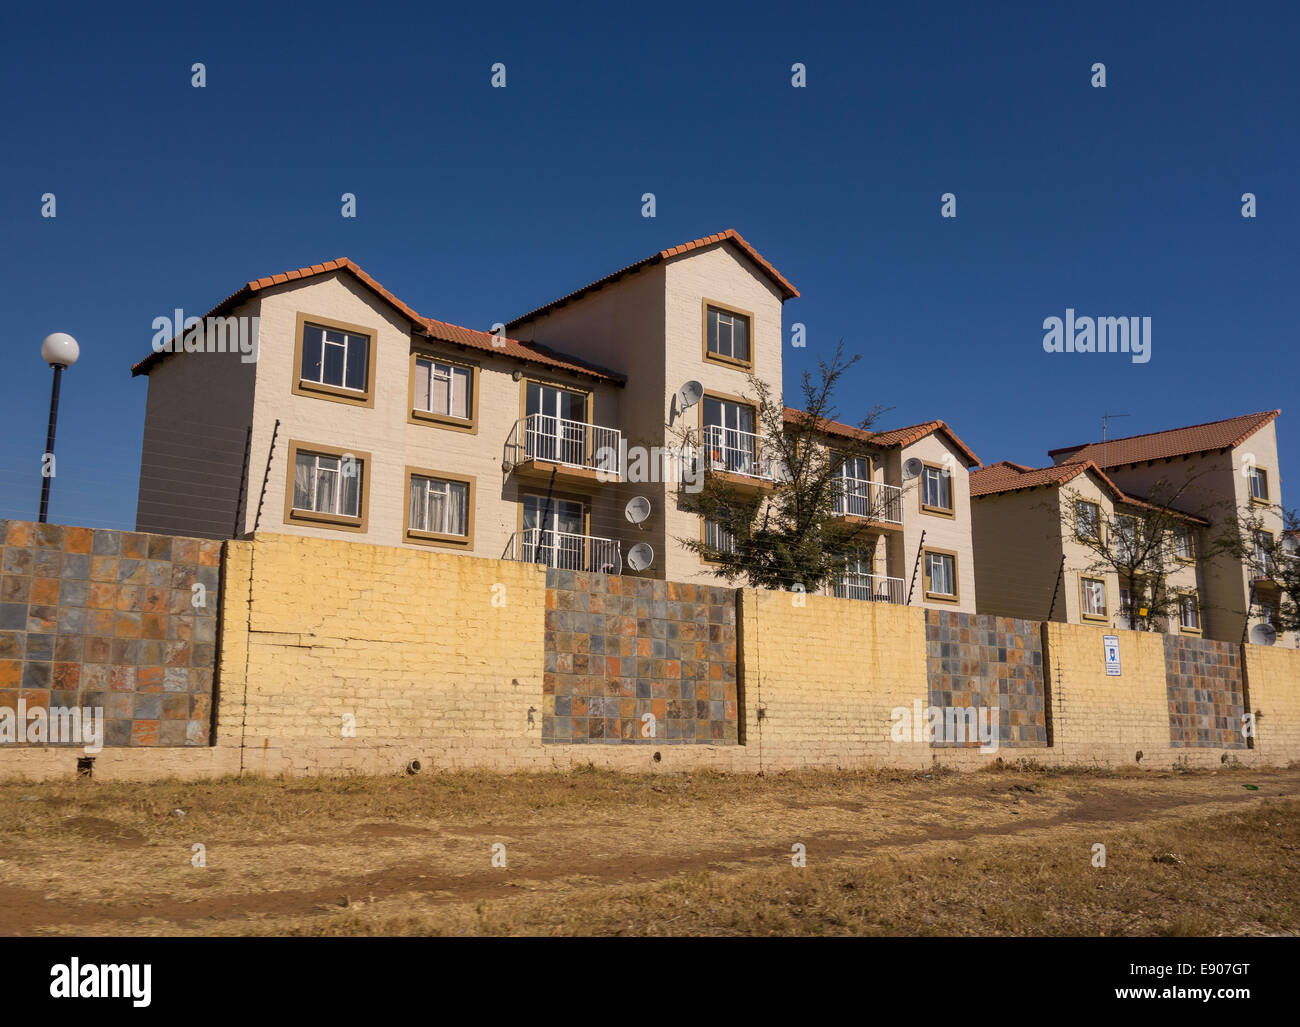 JOHANNESBURG, SOUTH AFRICA - Housing protected behind walls and fencing. Stock Photo